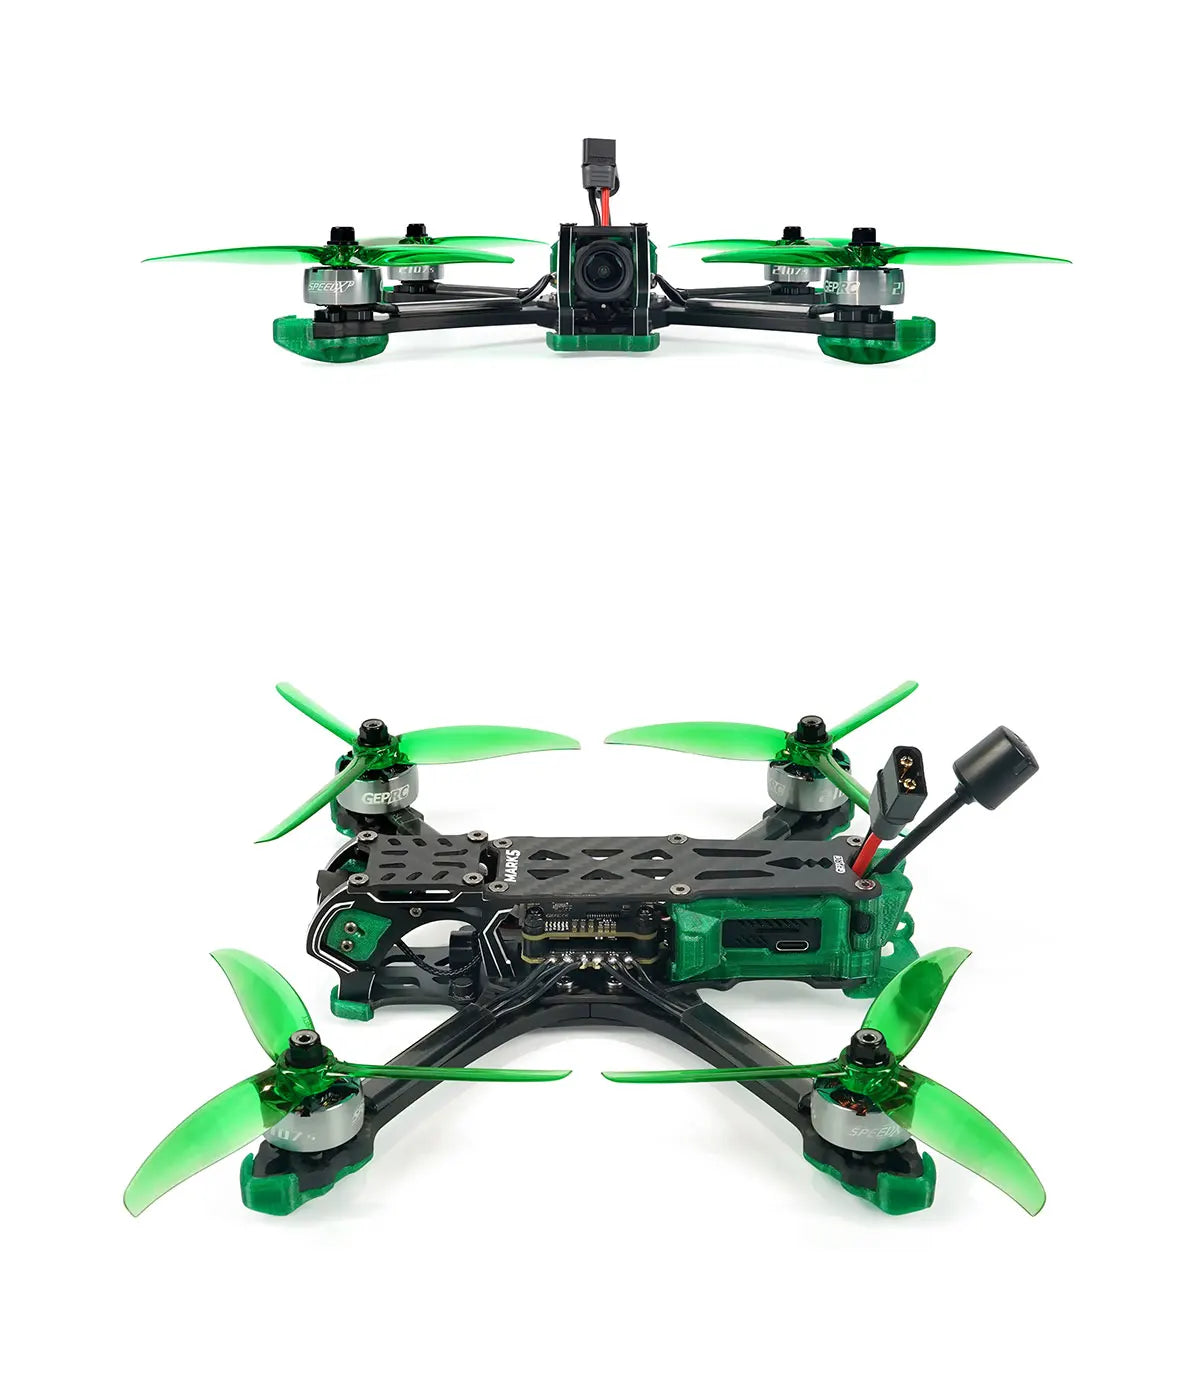 GEPRC New MARK5 HD O3 Freestyle FPV Drone, Add coral orange and emerald green colors to the O3 version to add more